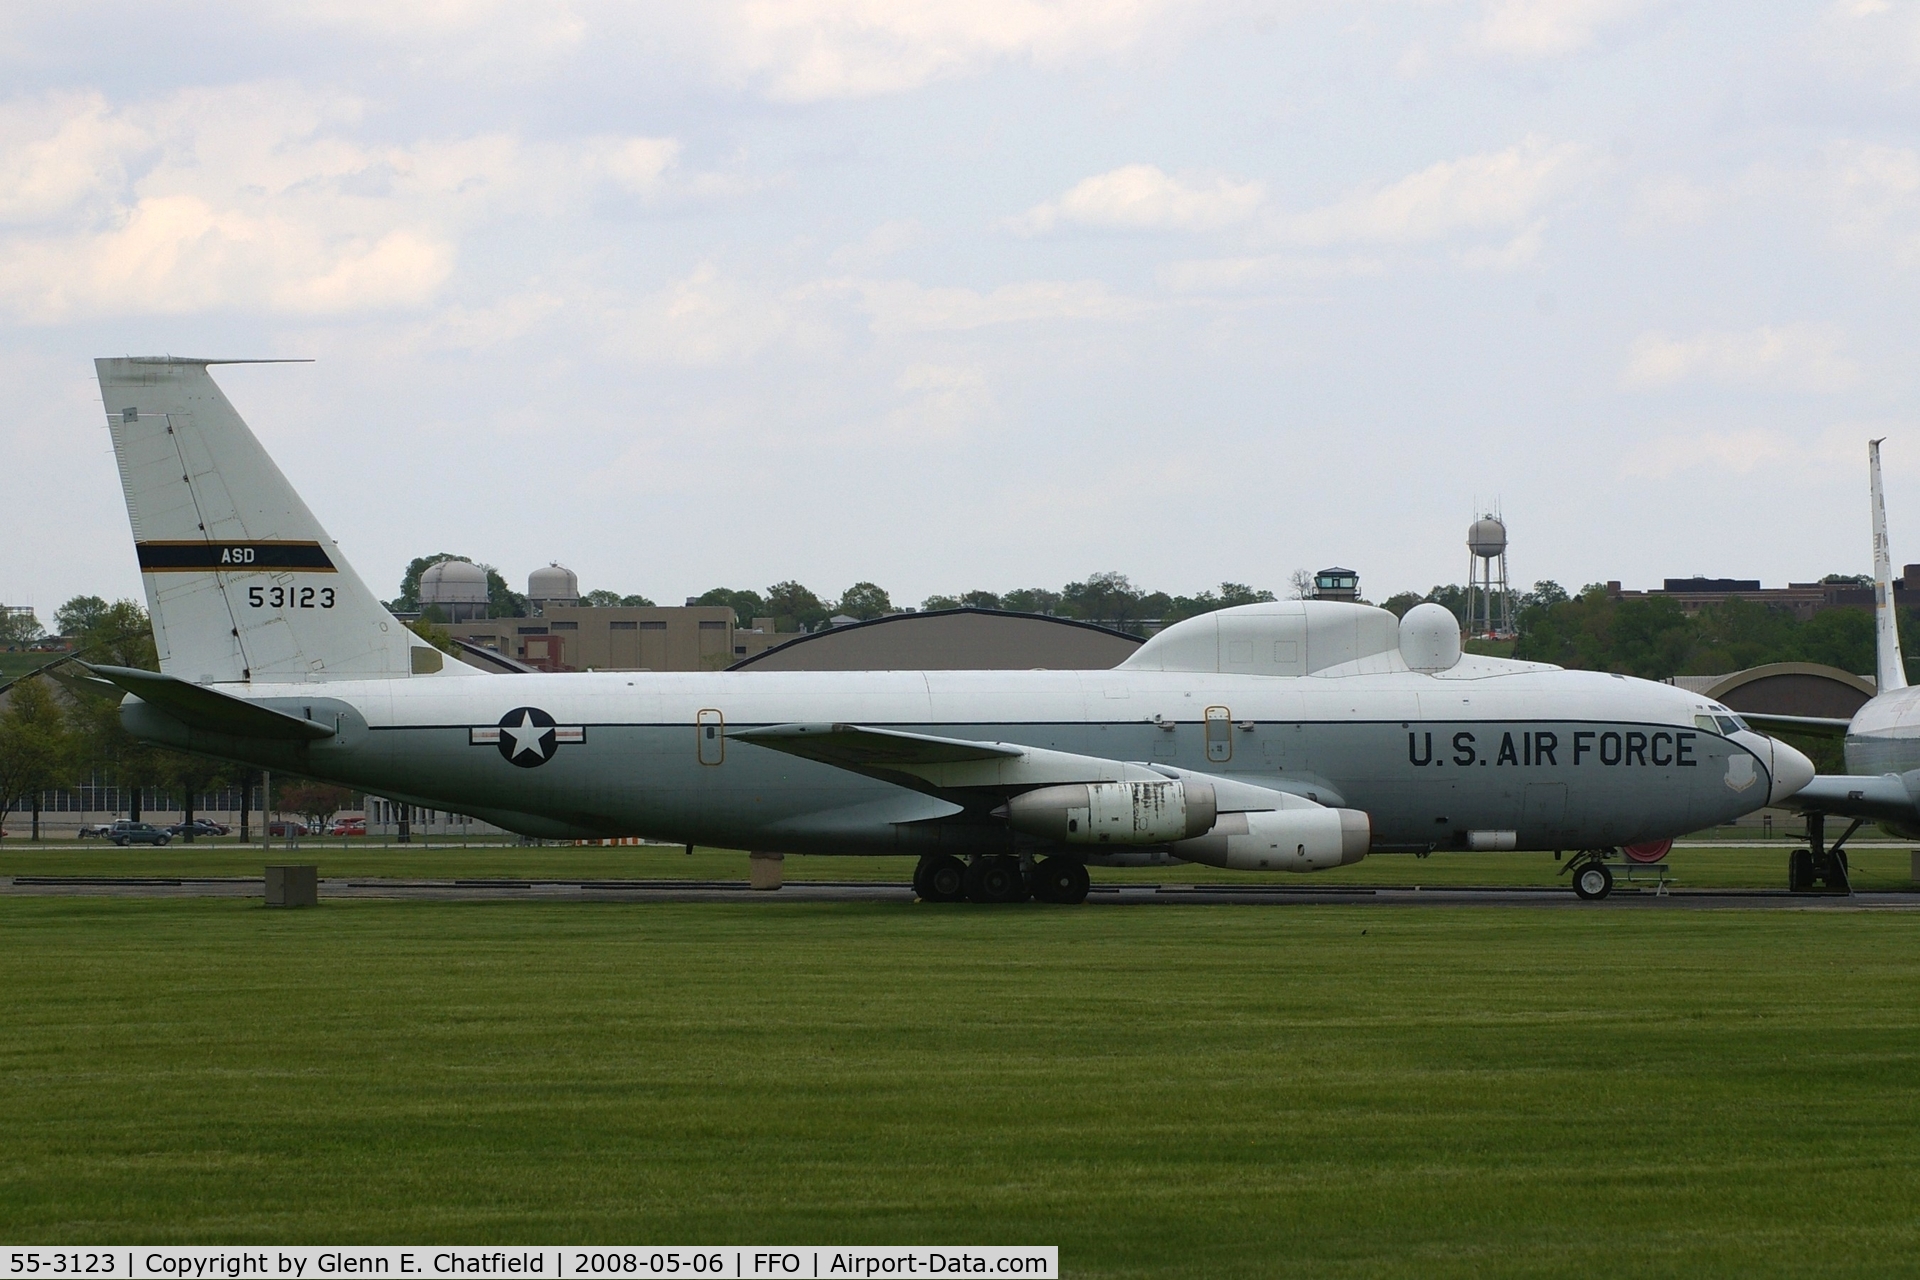 55-3123, 1955 Boeing NKC-135A-BN Stratotanker C/N 17239, NKC-135A at the National Museum of the U.S. Air Force